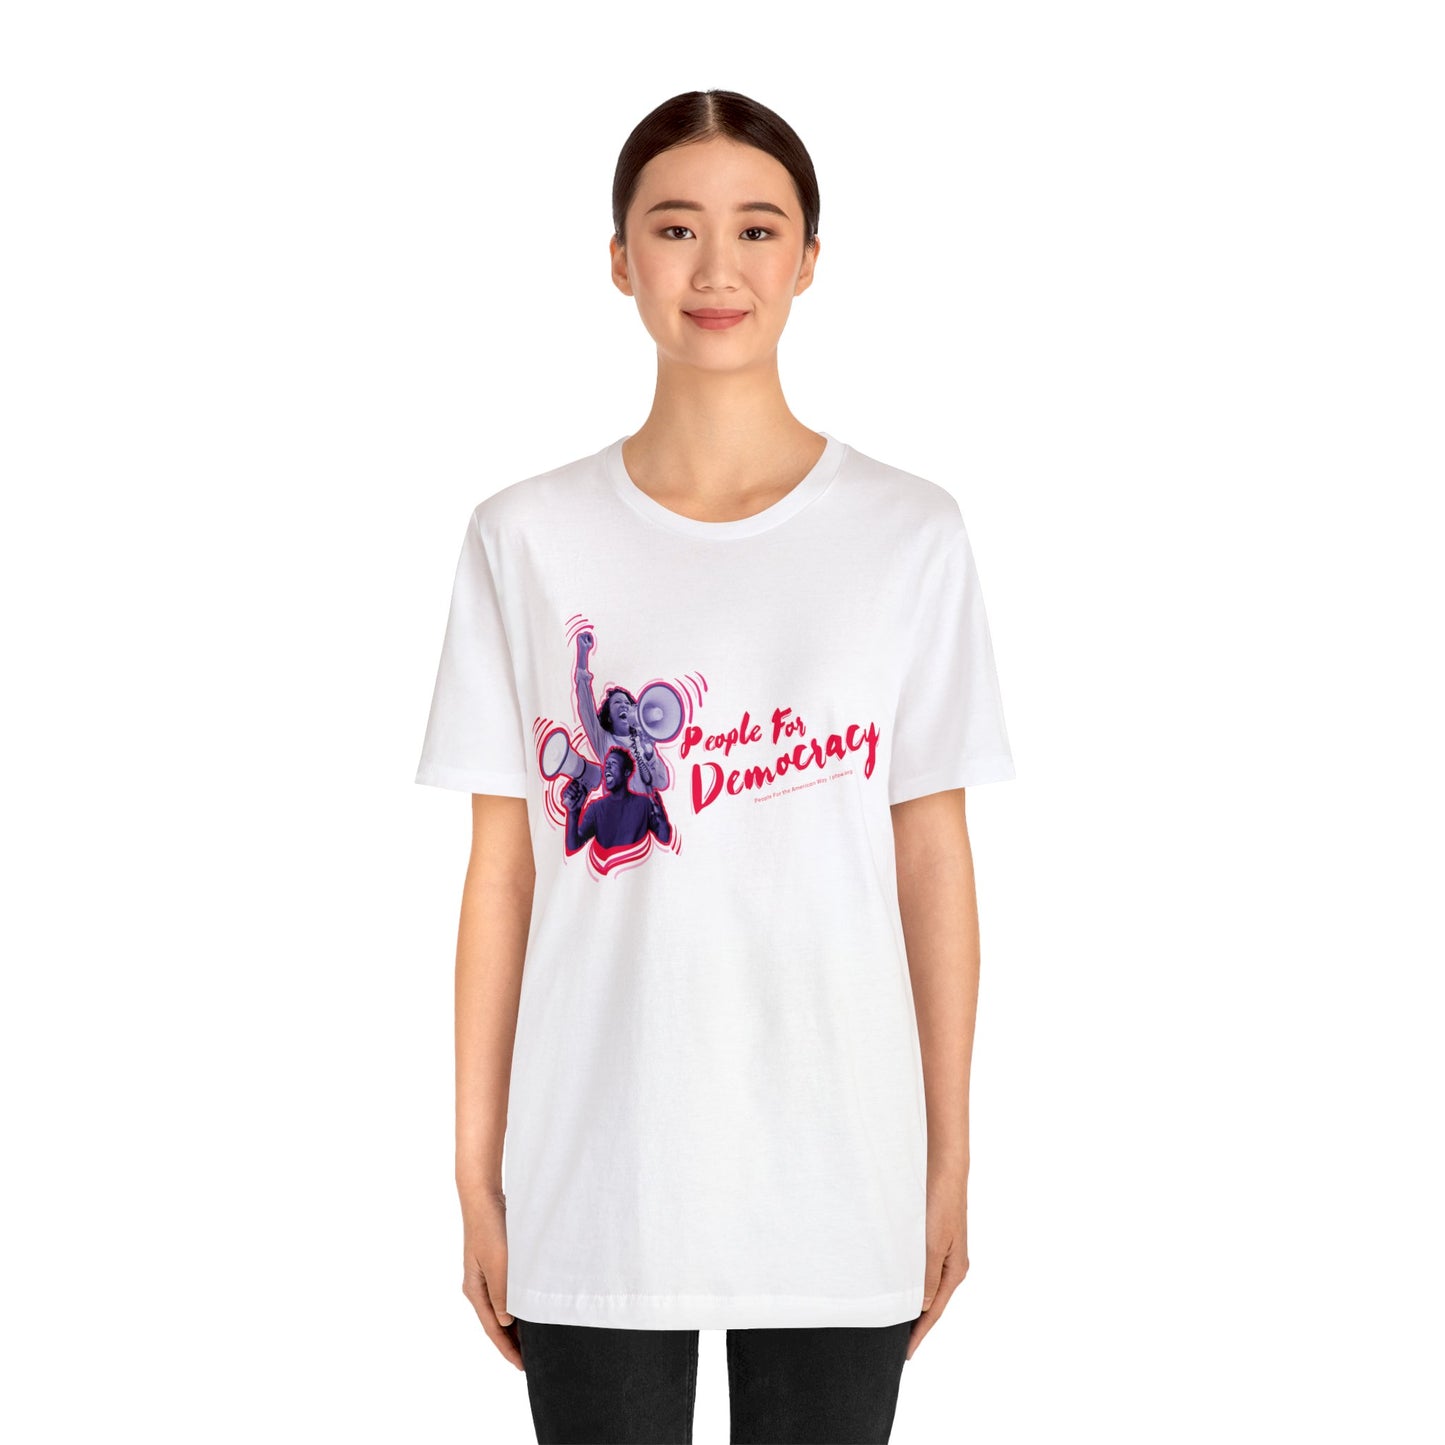 People For Democracy Shirt